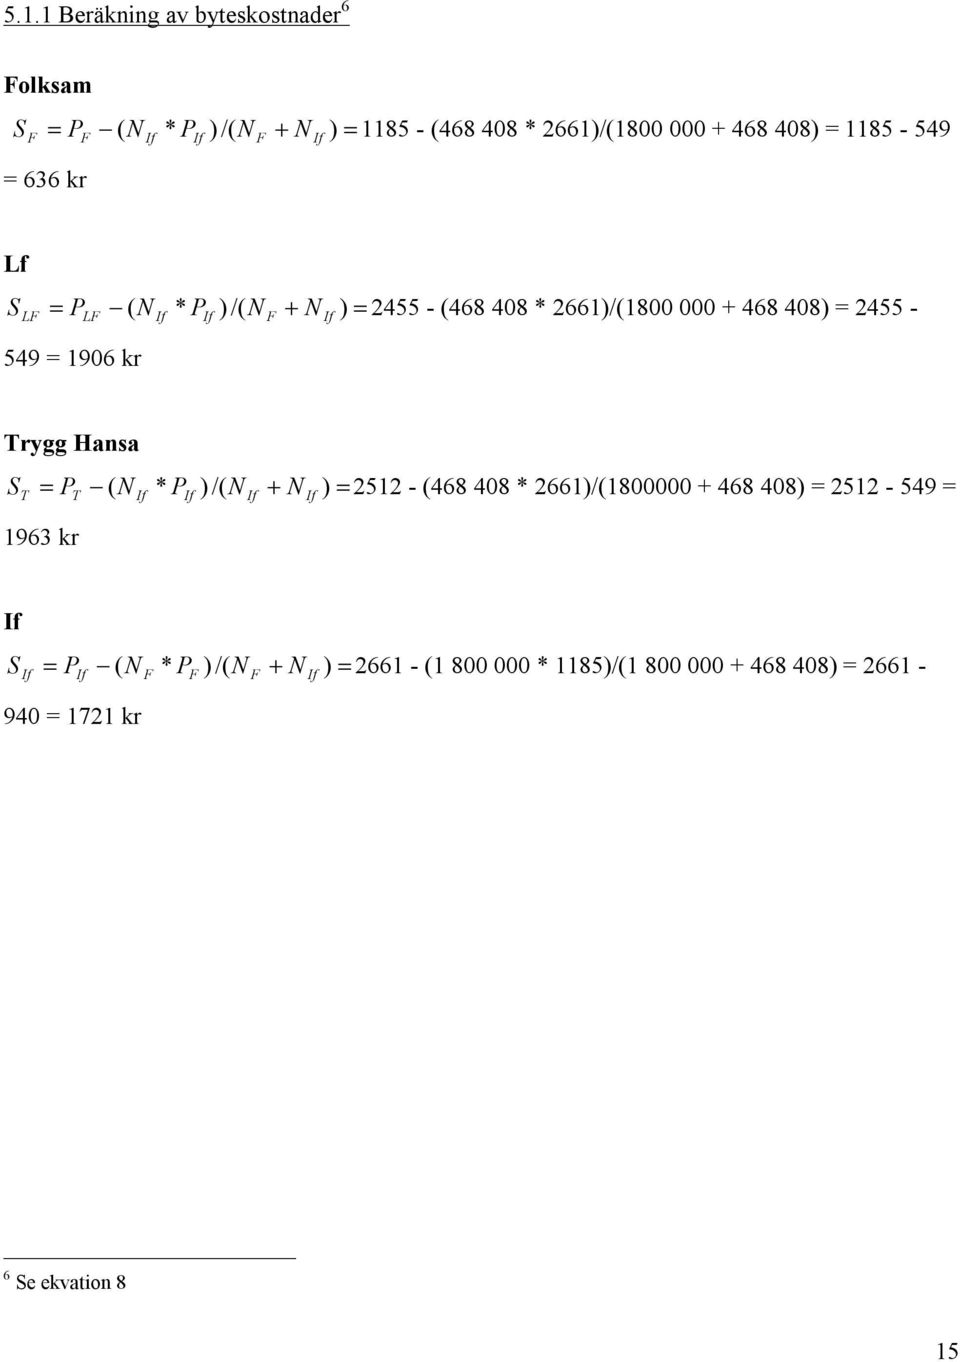 If F If Trygg Hansa S = P N * P ) /( N + N ) = 2512 - (468 408 * 2661)/(1800000 + 468 408) = 2512-549 = T T 1963 kr ( If If If If